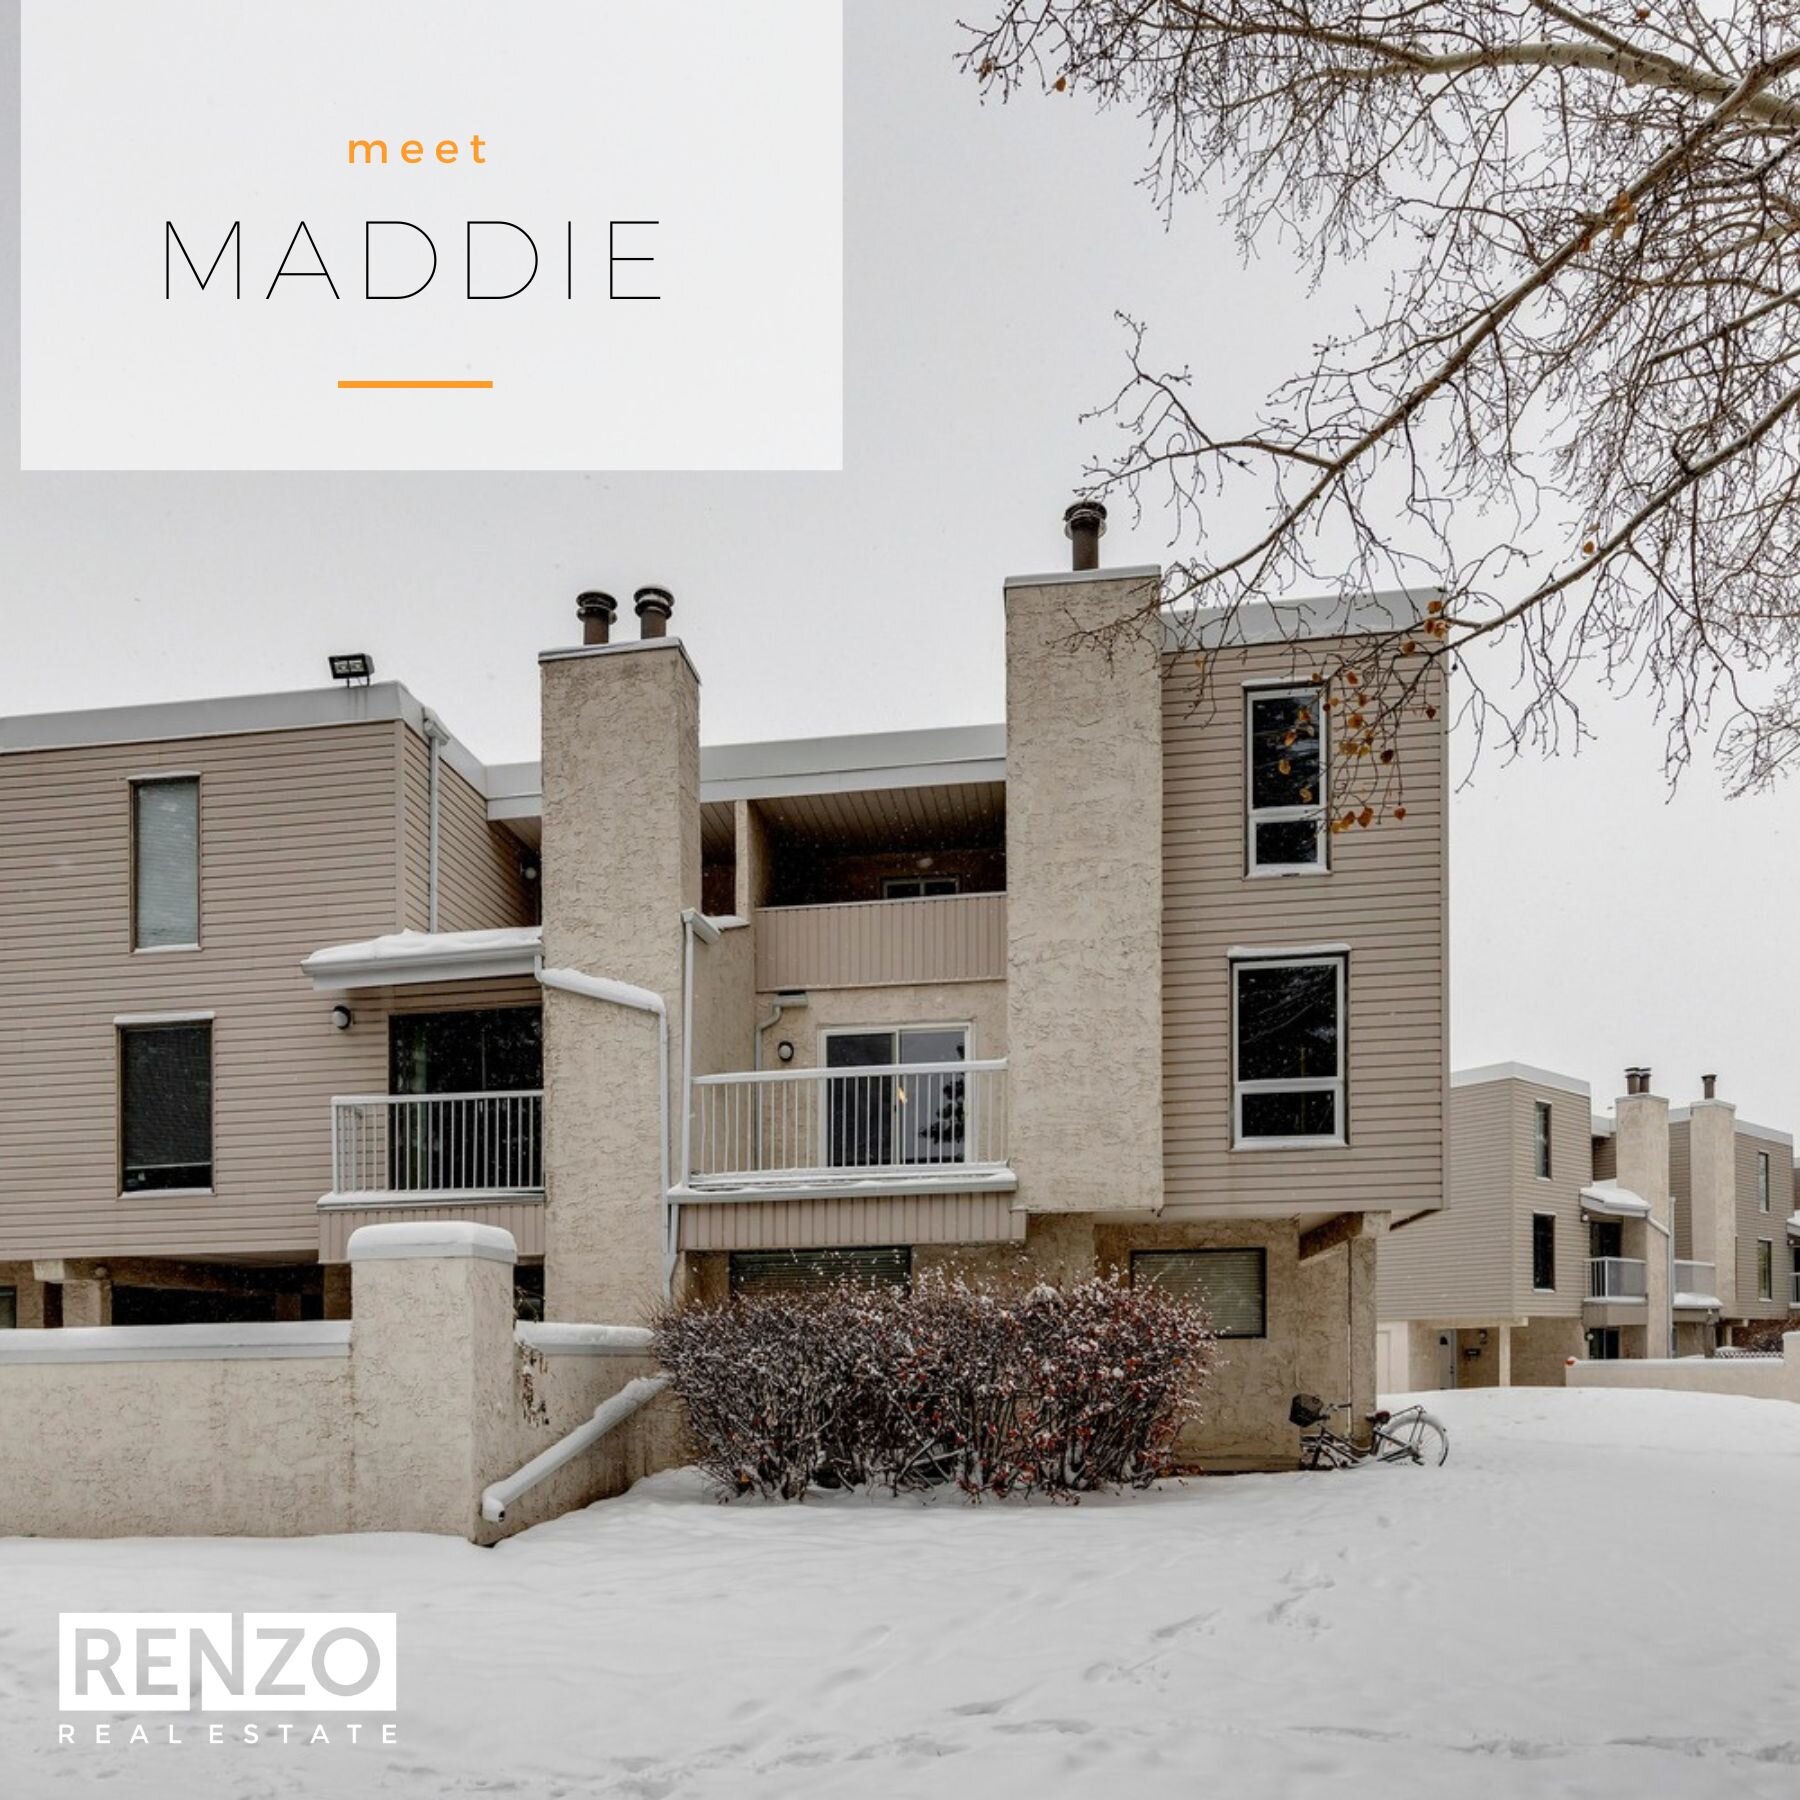 📍3500 Varsity Drive NW #318
$299,900.00

🛏️ 2 bedroom 
🛀🏽 1 bath

OPEN HOUSE THIS WEEKEND!
Sunday, November 13 from 1 PM to 3 PM

Meet Maddie - The chic top-level home in Varsity's exclusive McLaurin Village is only a short distance from the Univ